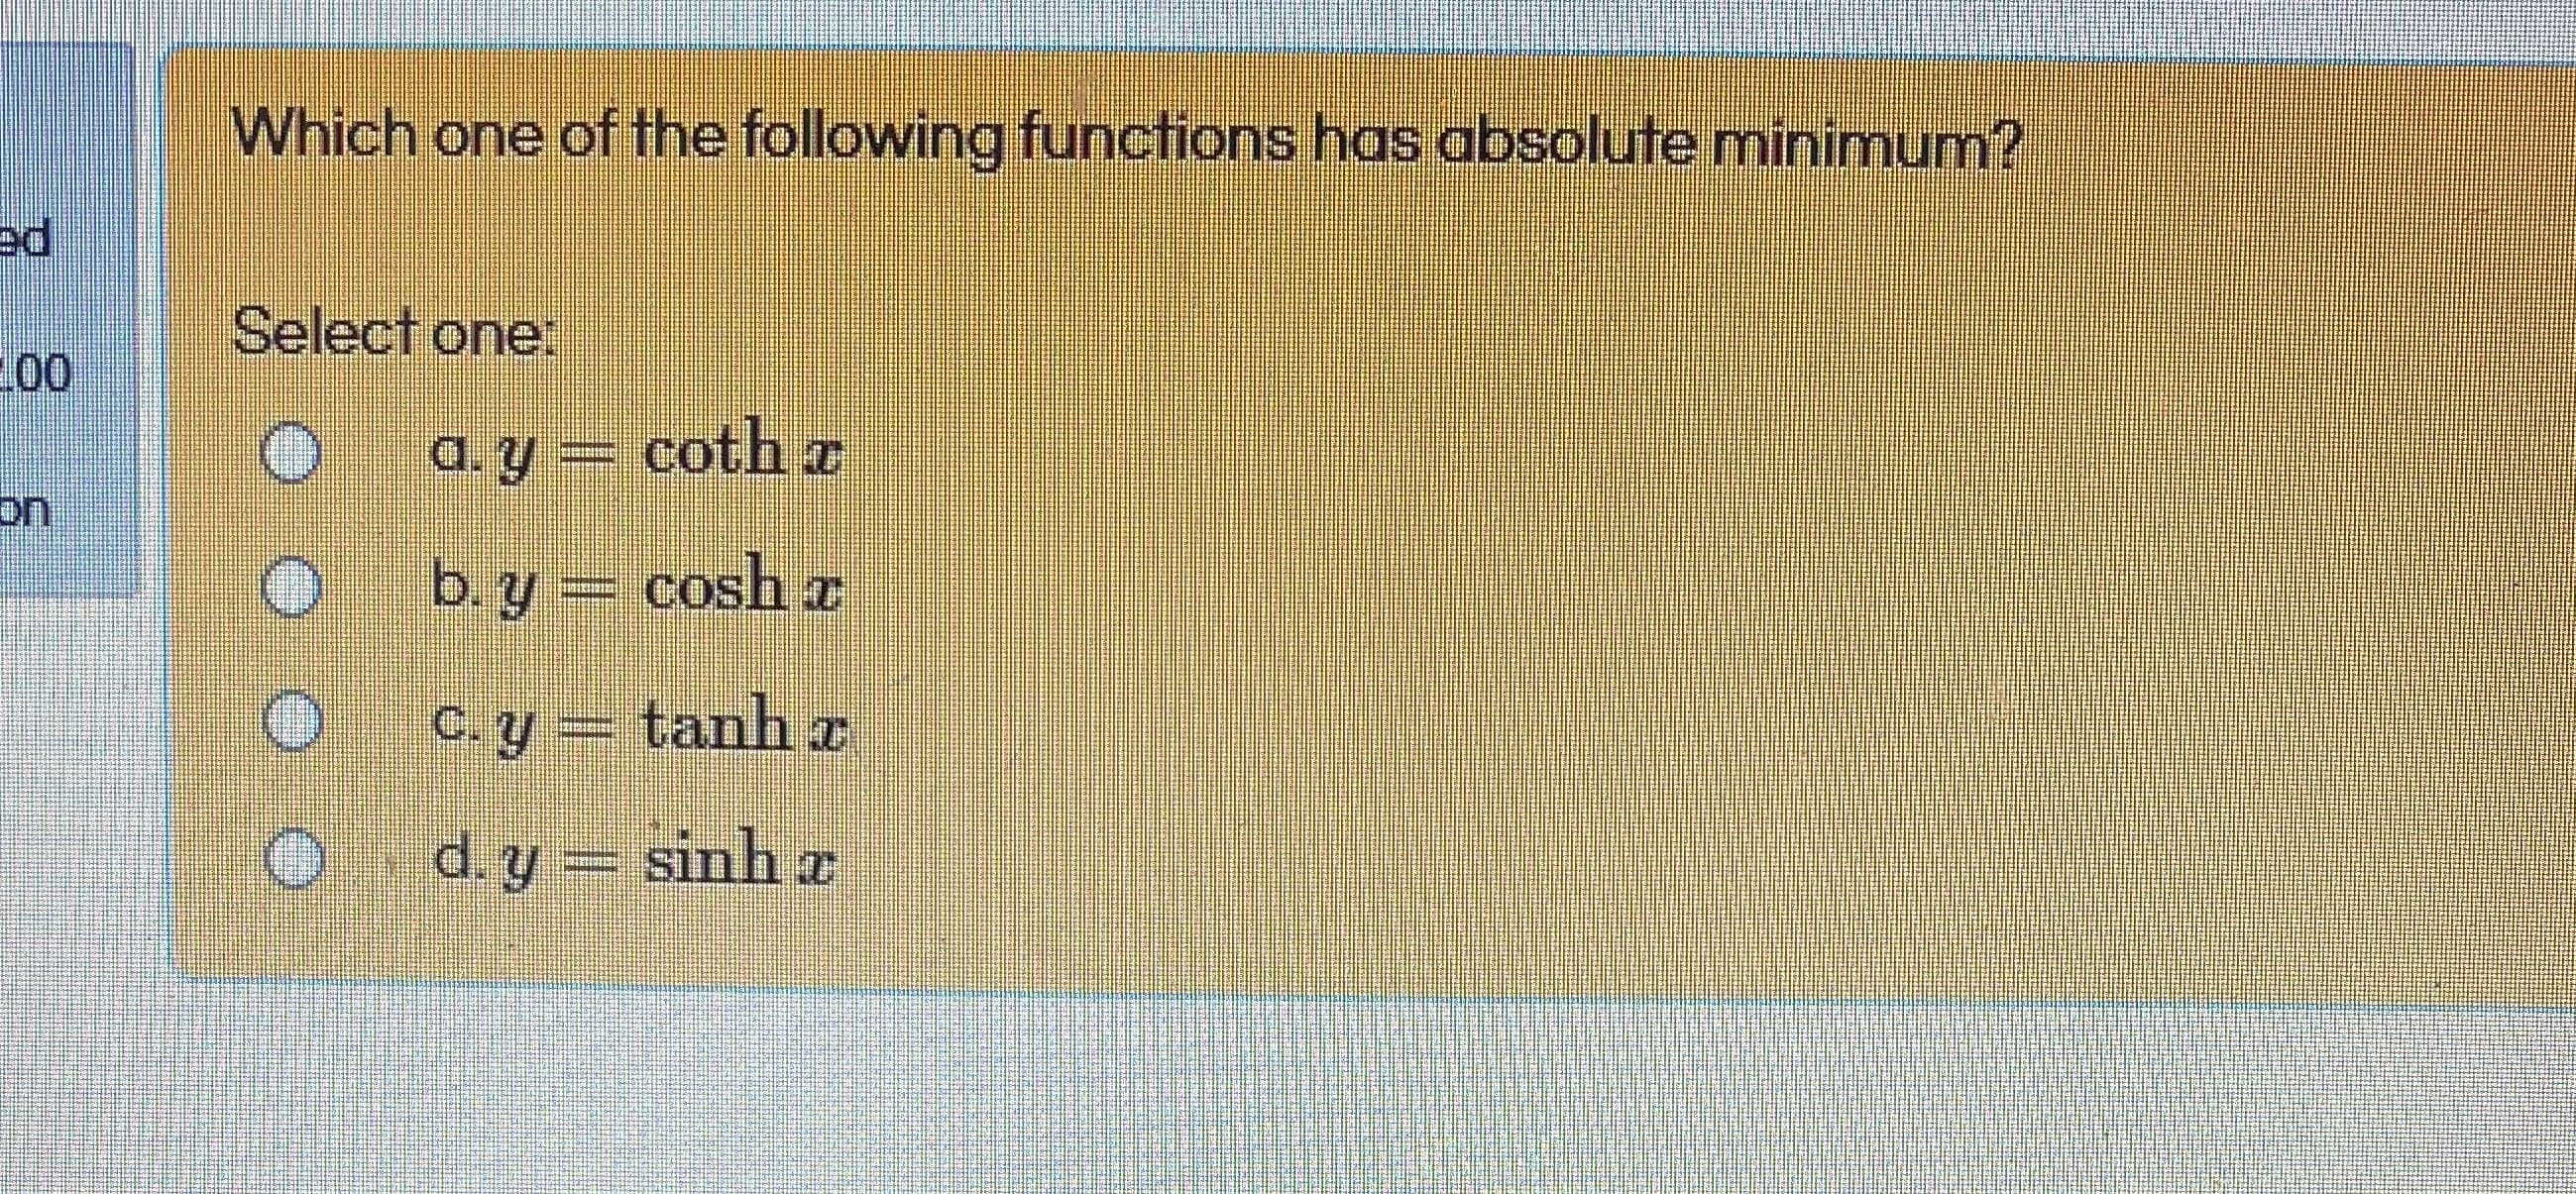 Which one of the following functions has absolute minimum?
